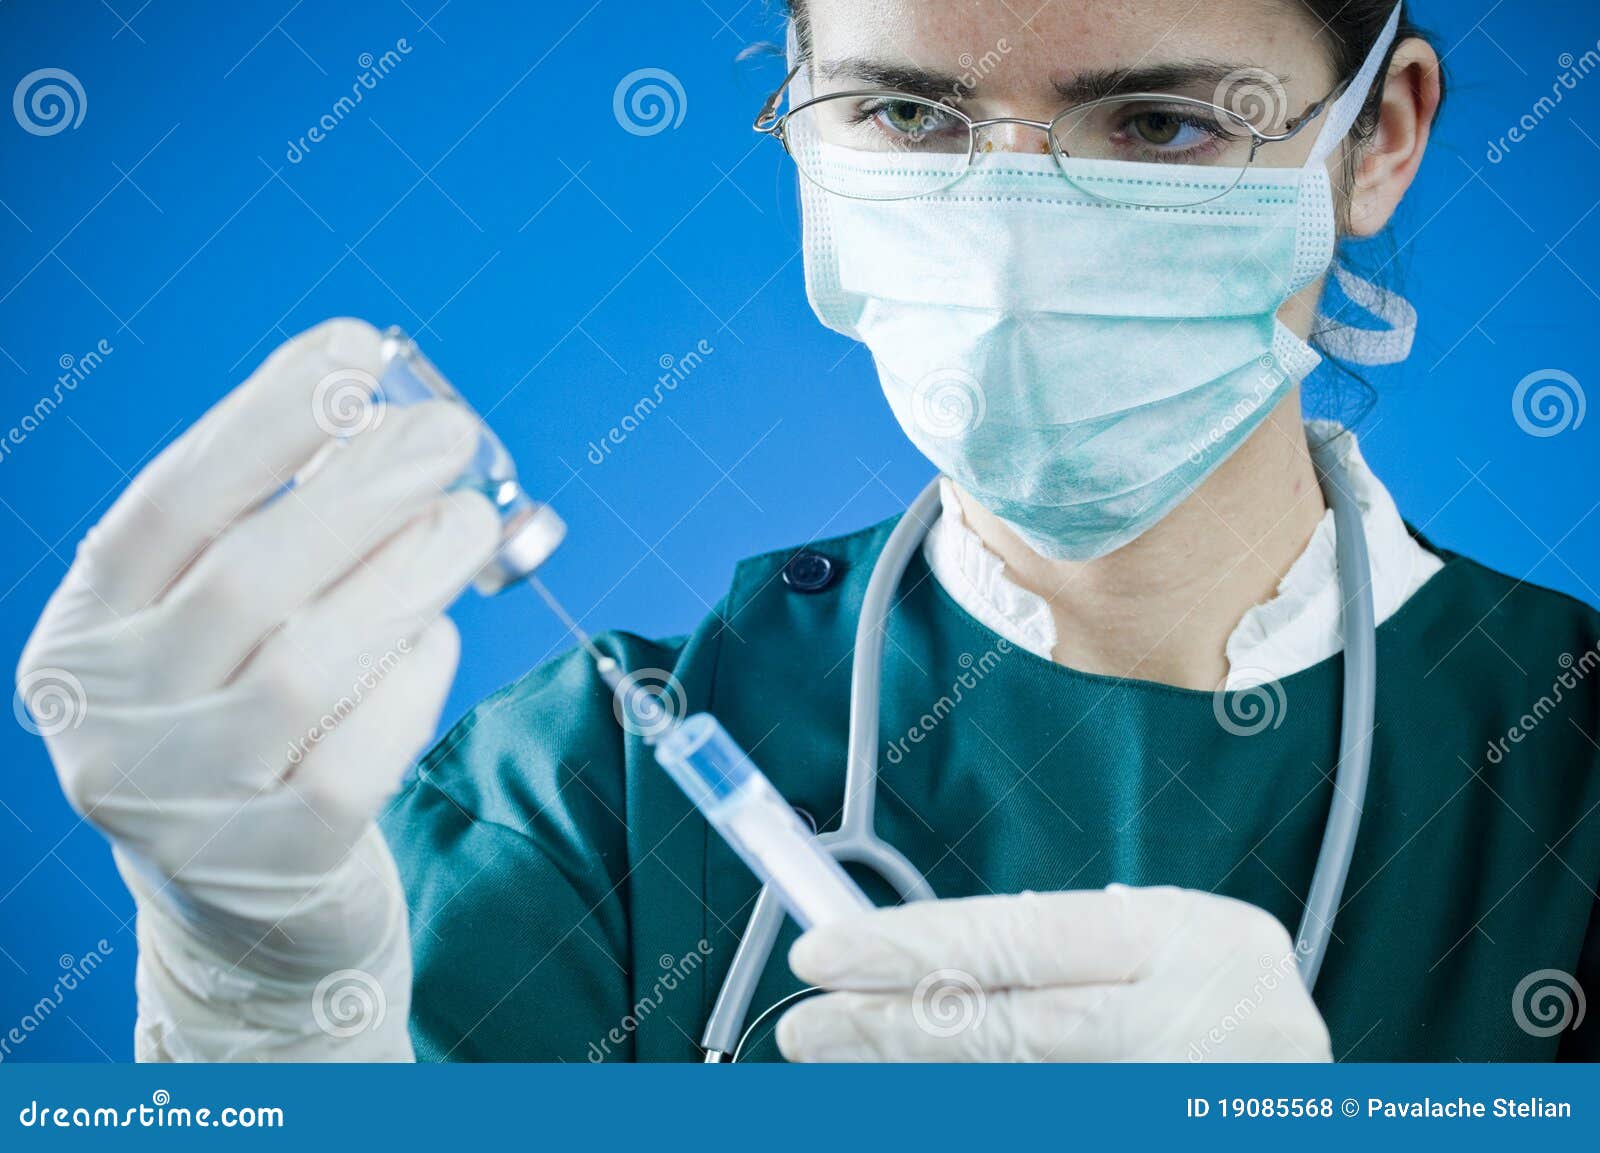 medic with syringe and medicine